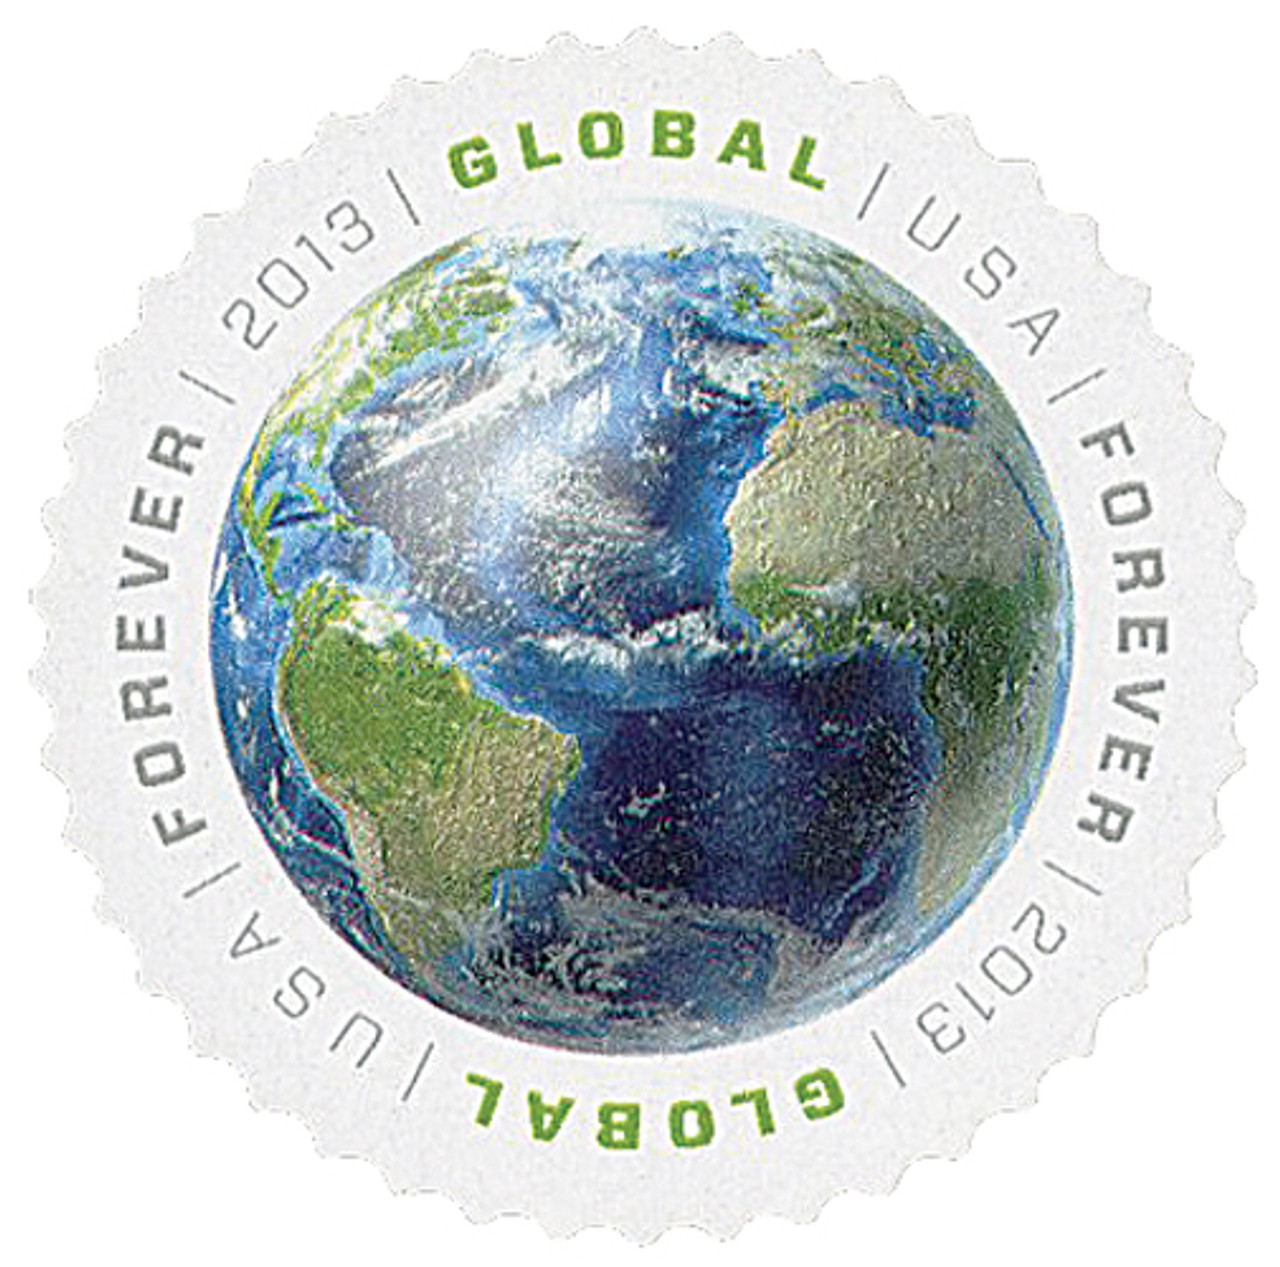 4740 USA GLOBAL FOREVER - EARTH Pane of 20 US Forever Stamps MNH